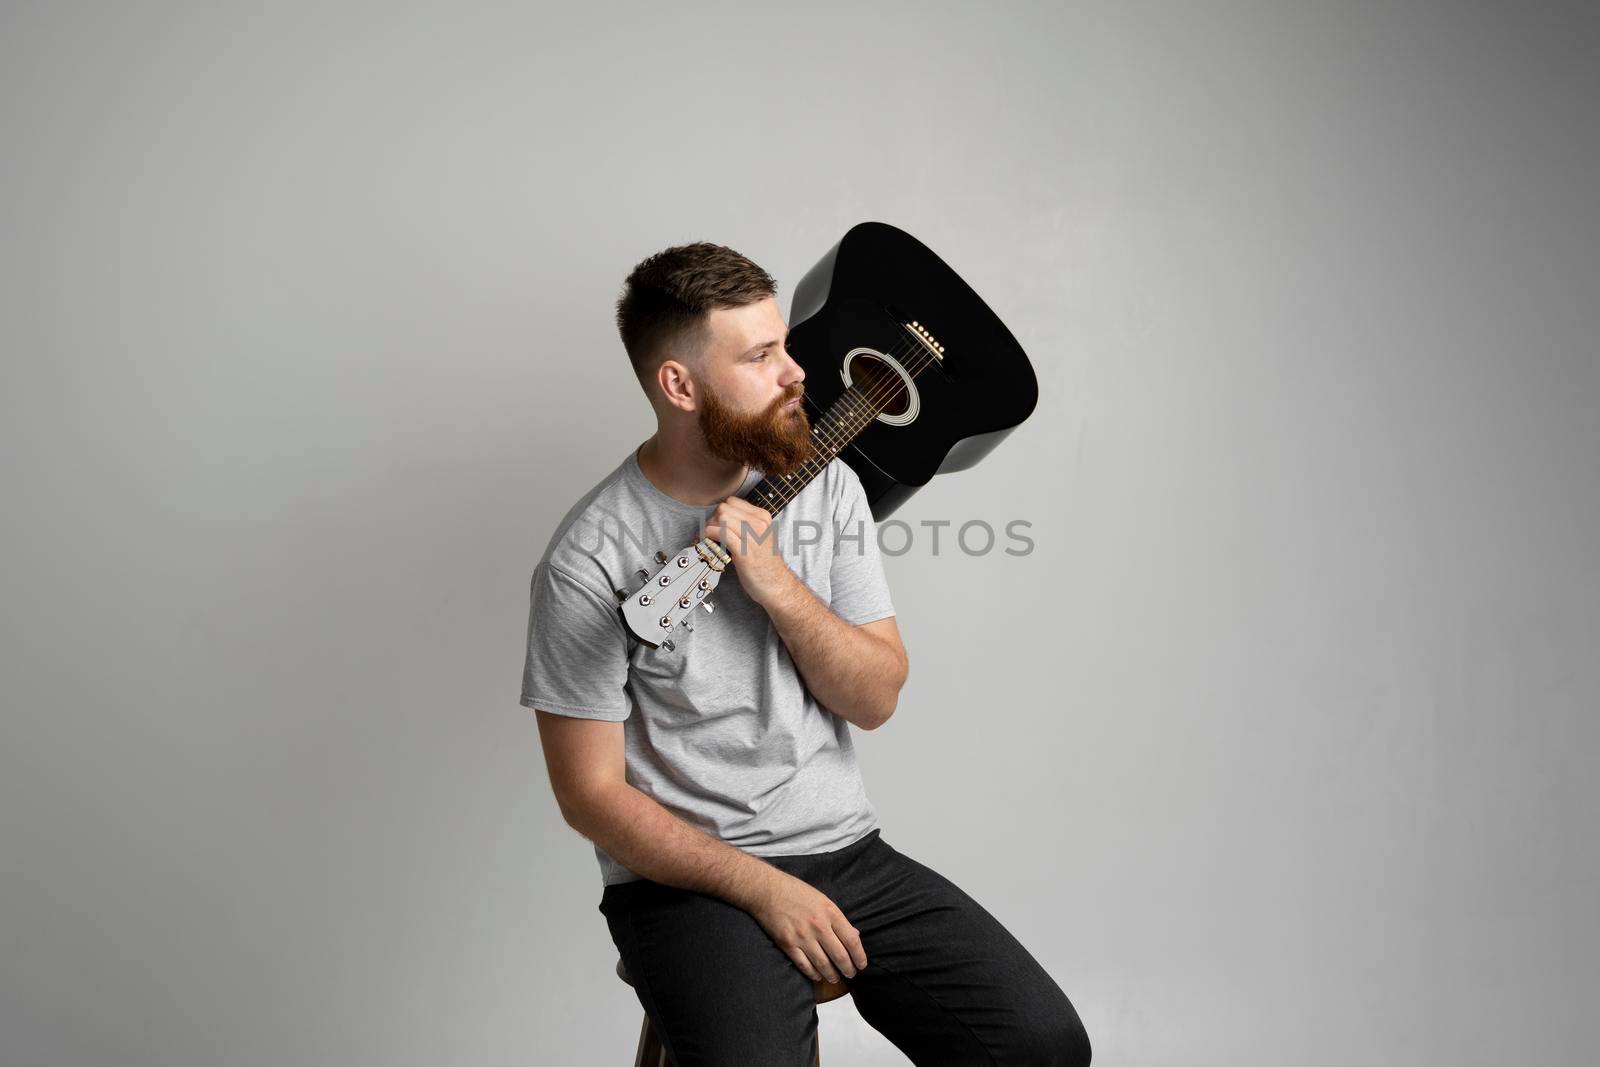 Handsome bearded brutal man musician in a grey t-shirt holding a acoustic guitar on a shoulder on a white background